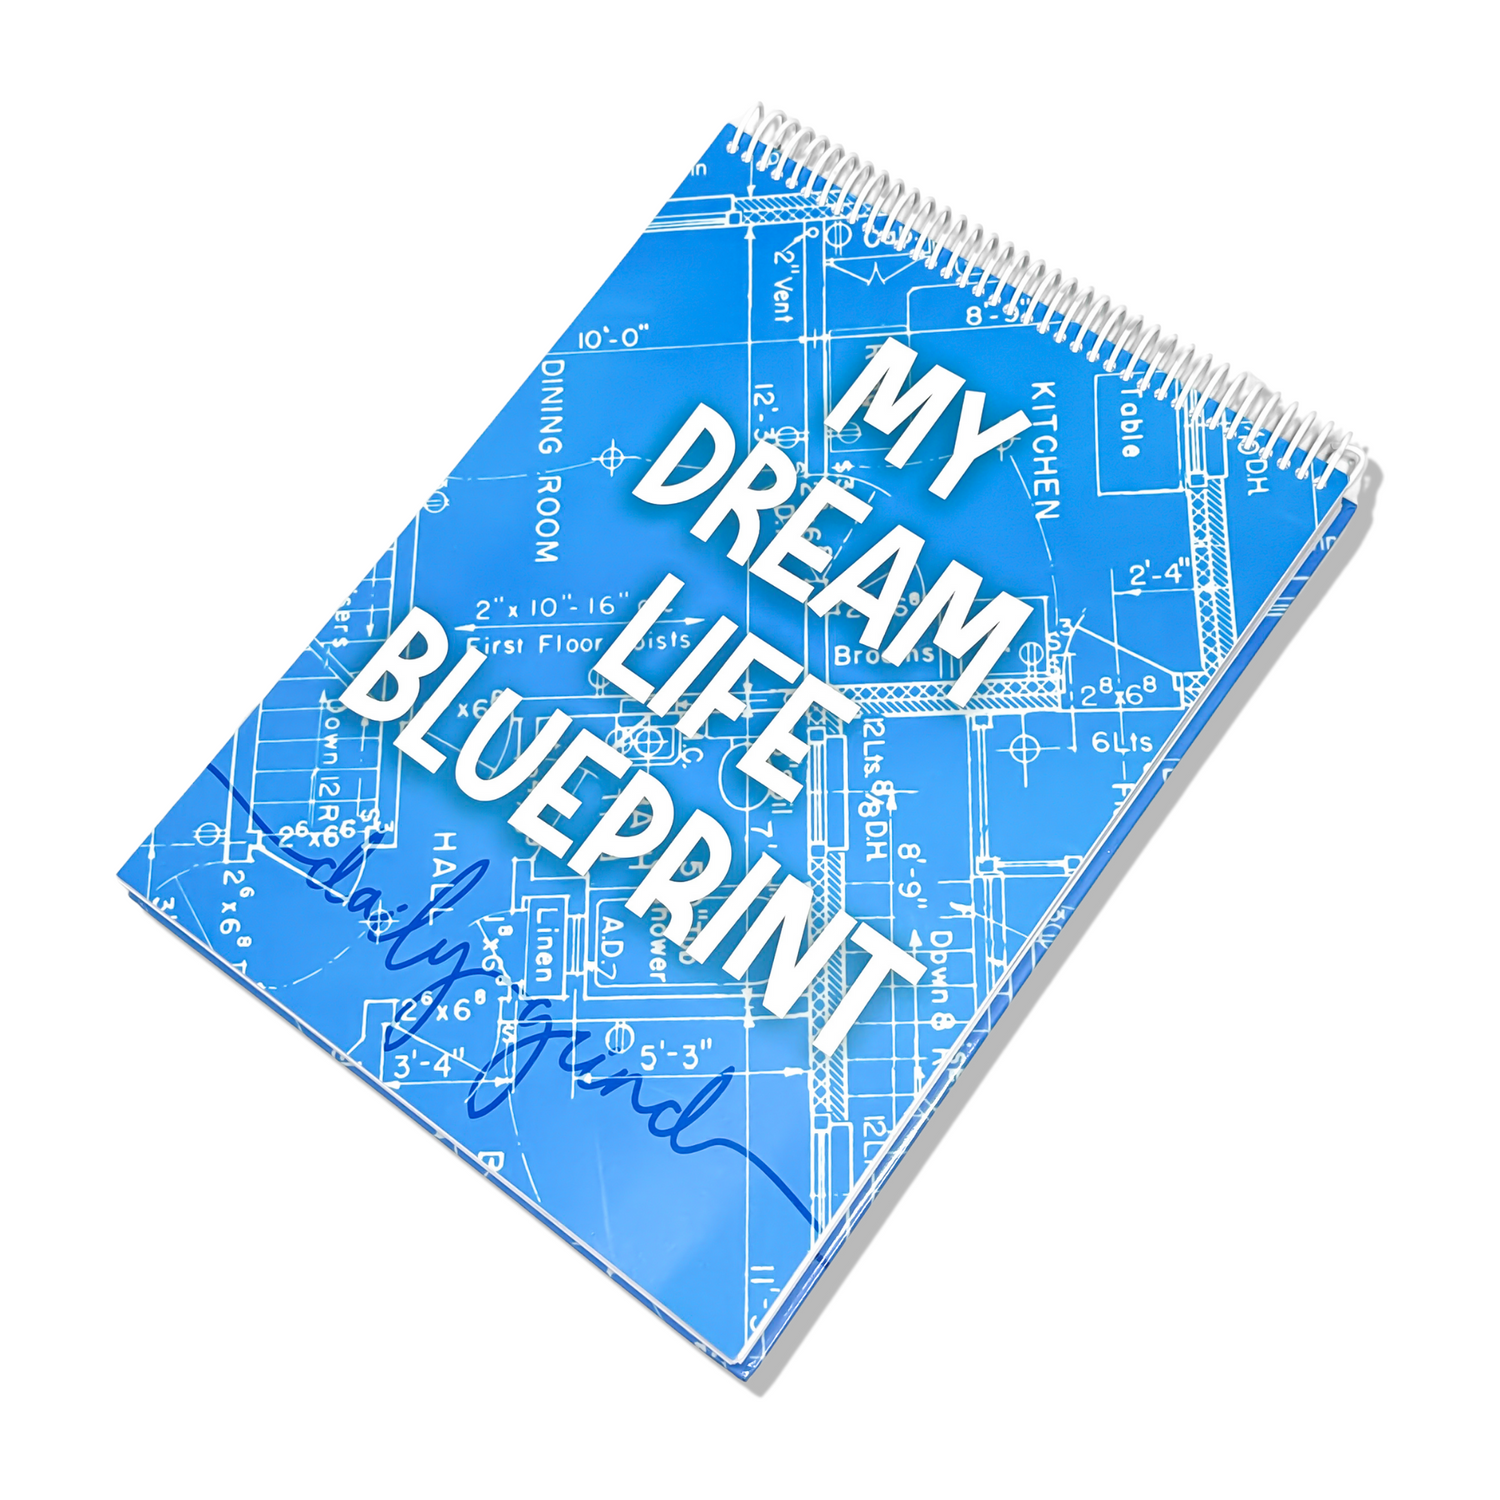 Front cover of &quot;My Dream Life Blueprint Workbook&quot;